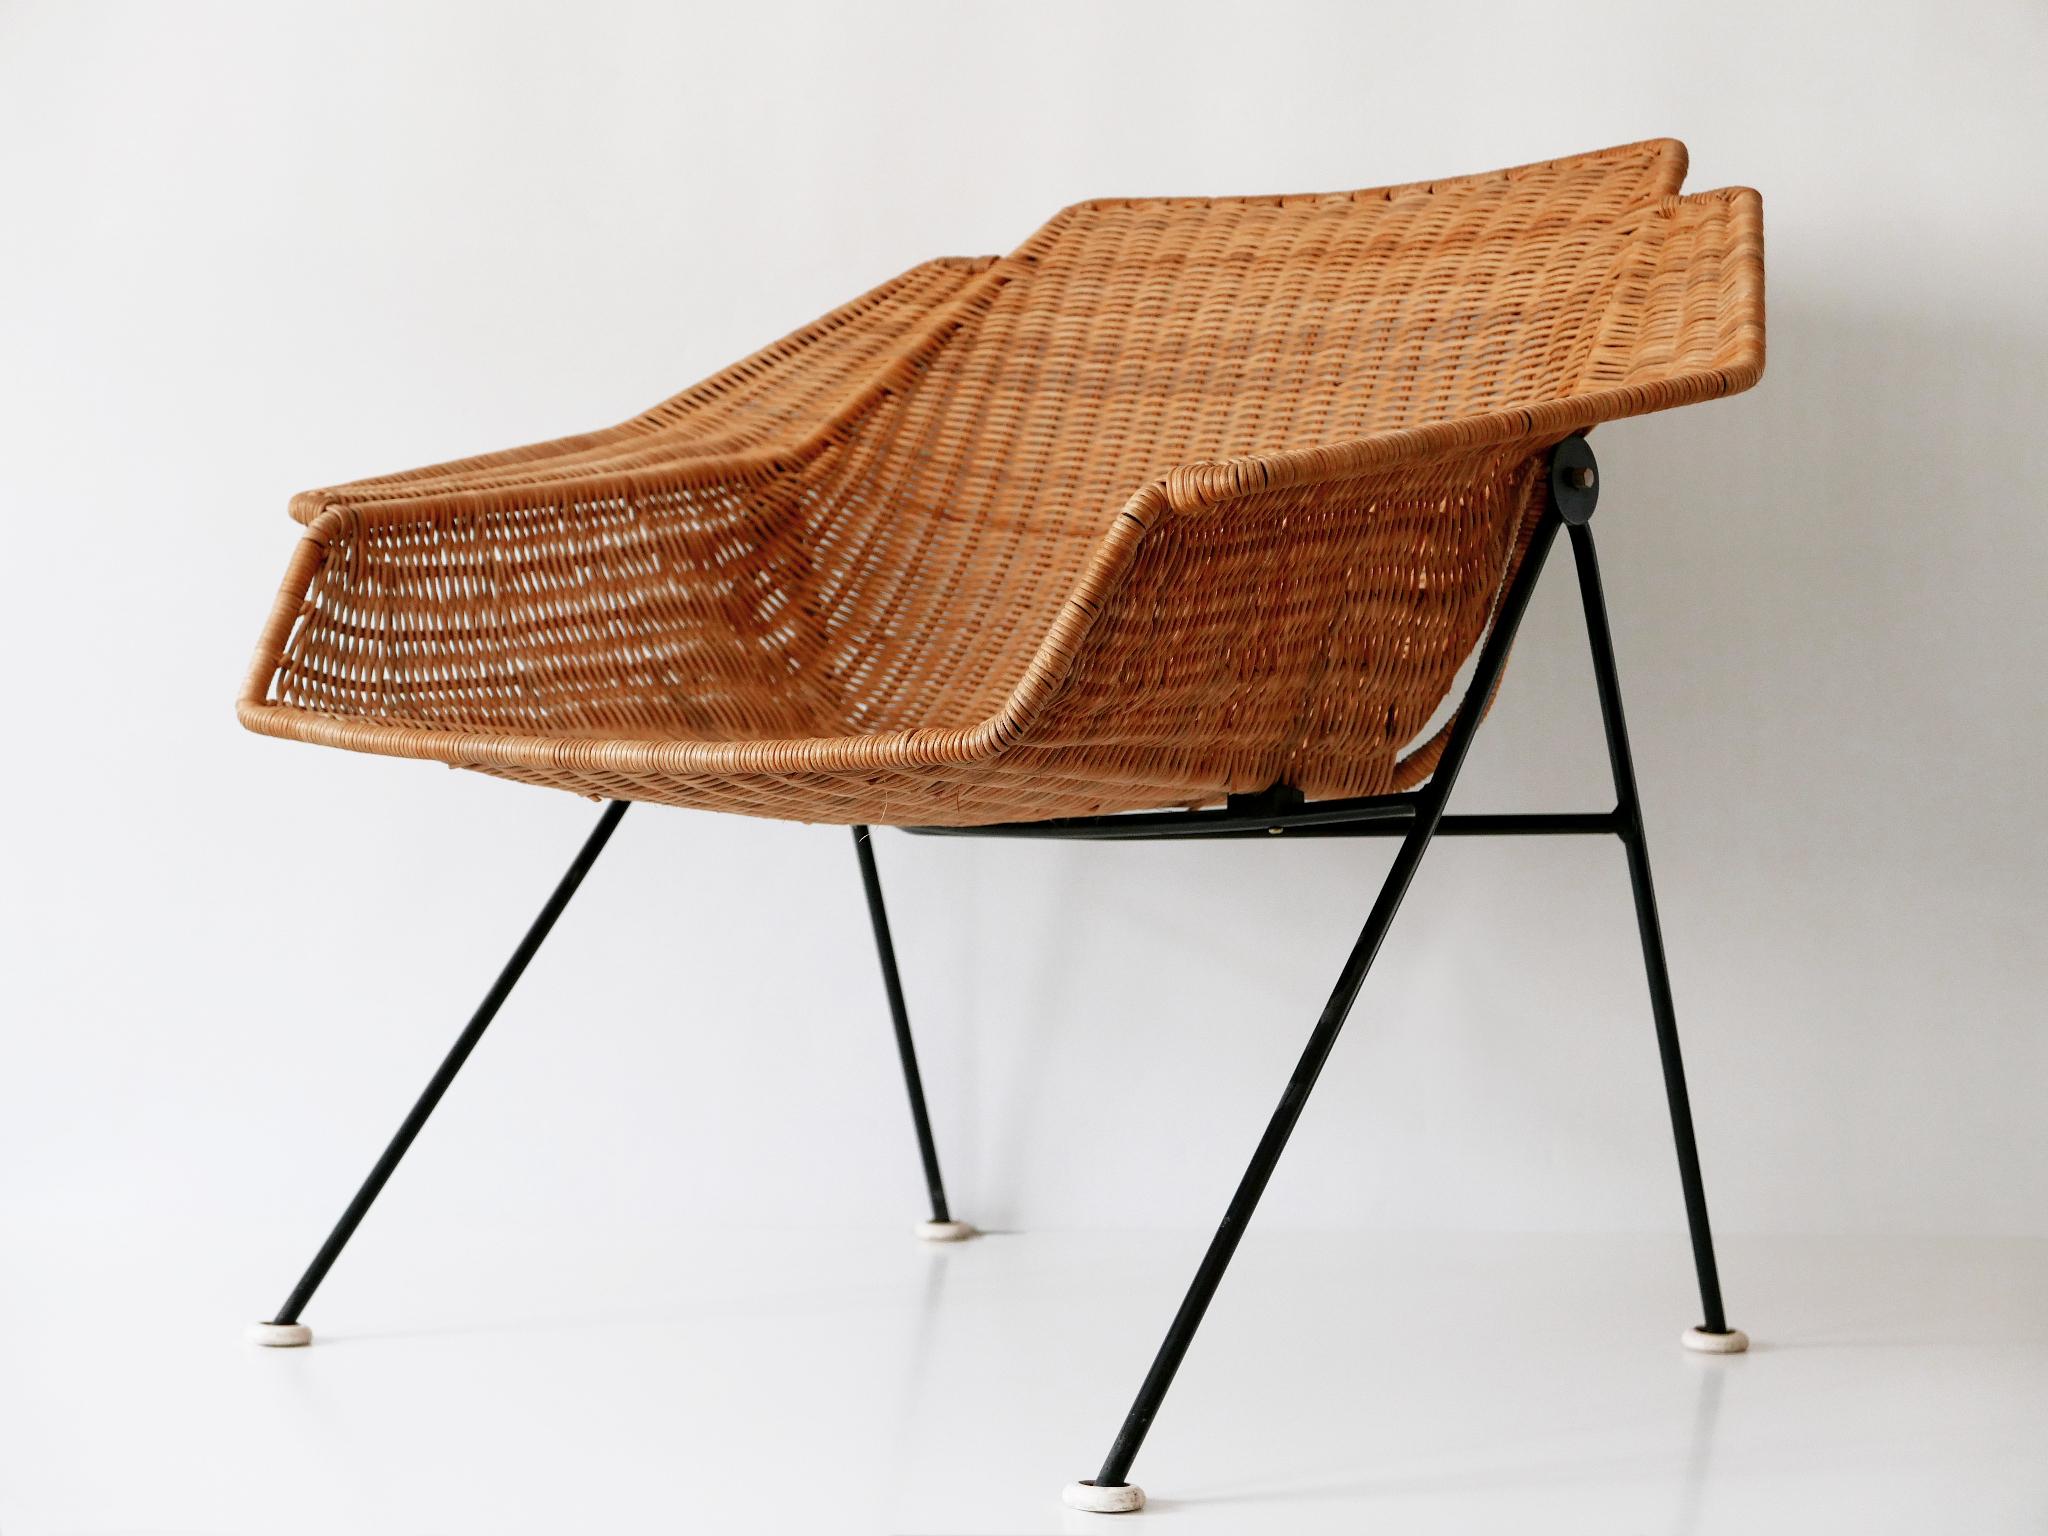 Swedish Exceptional Mid-Century Modern Wicker Lounge Chair or Armchair 1950s Sweden For Sale